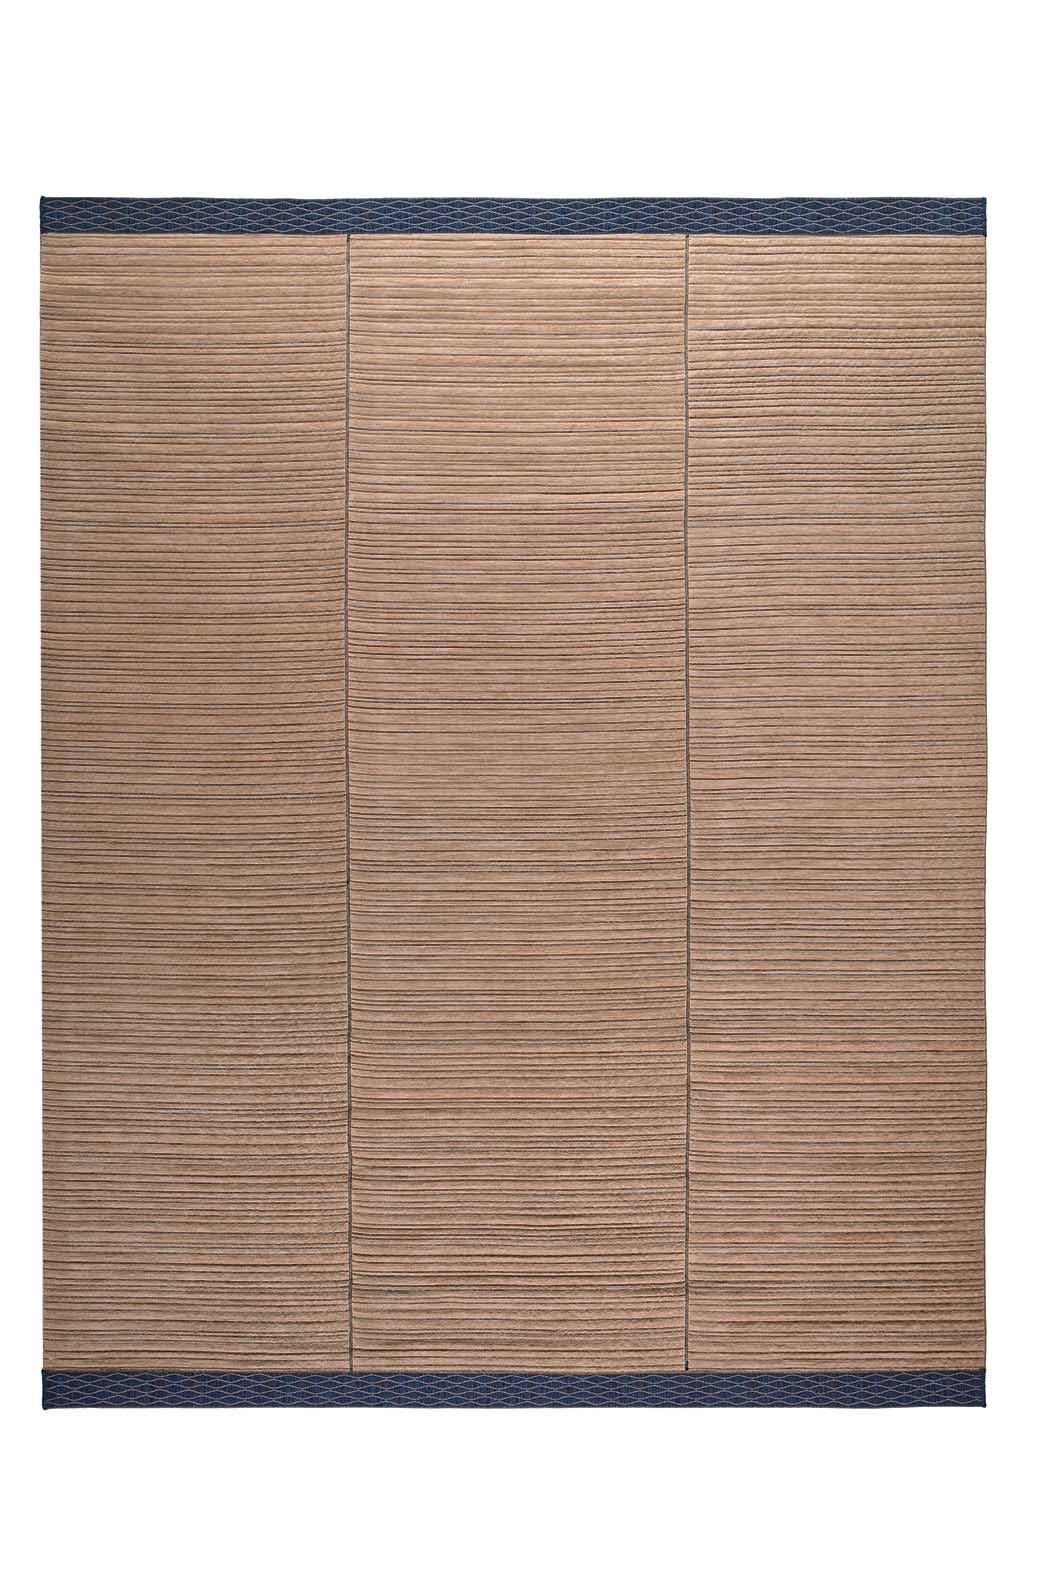 Gervasoni Guna 02 Rug in Blue  by Chiara Andreatti In New Condition For Sale In Brooklyn, NY